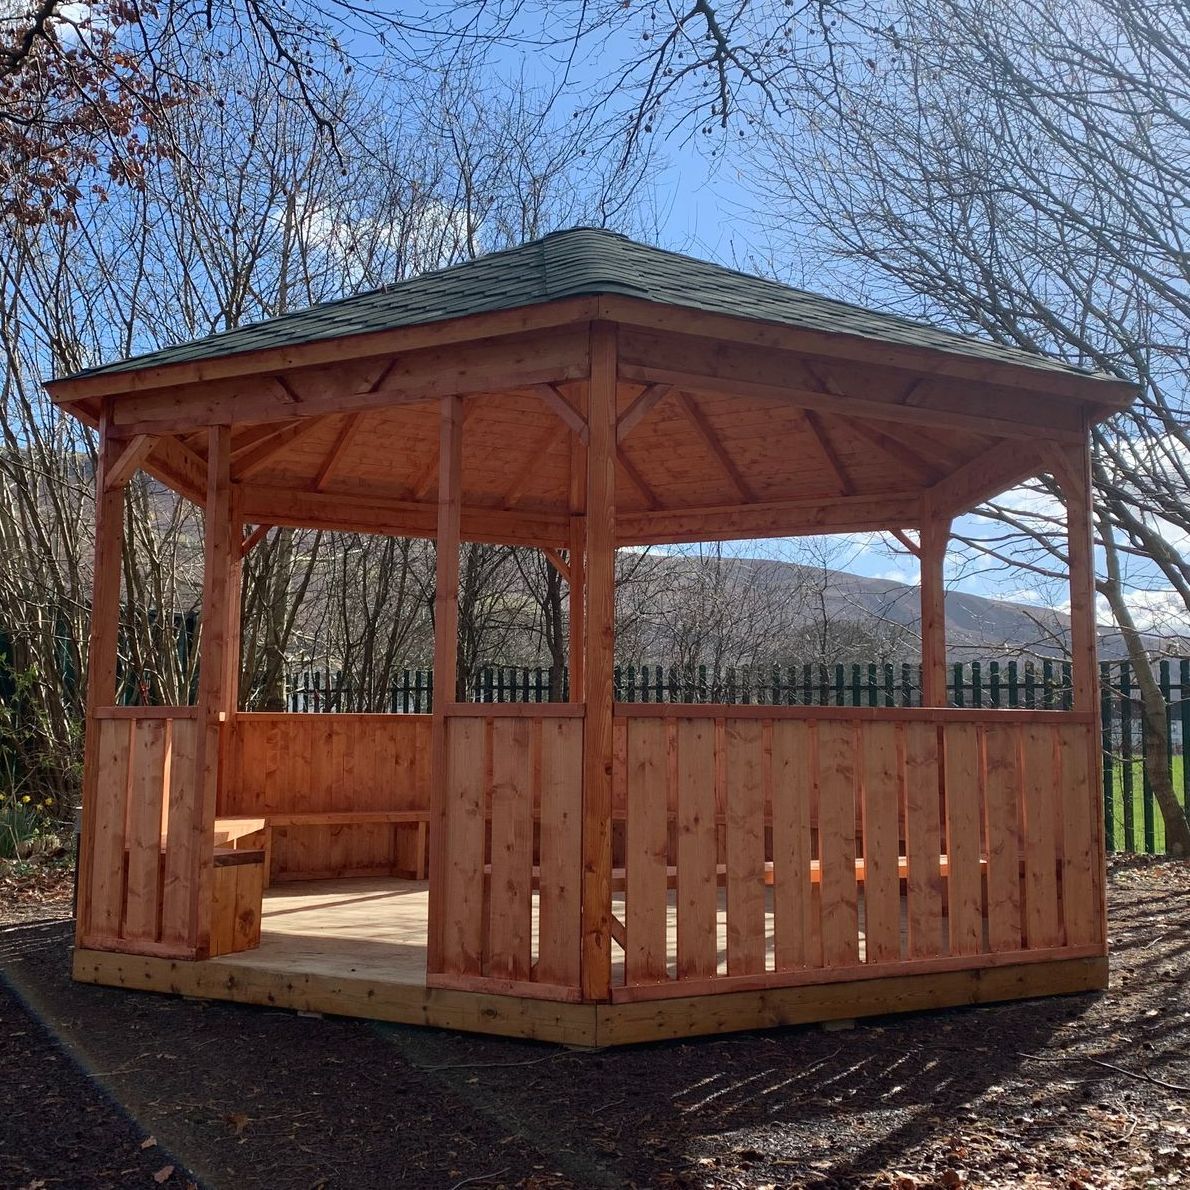 A 4.5 Metre hexagon gazebo delivered to Little Rascals Playgroup in Merthyr Tydfil